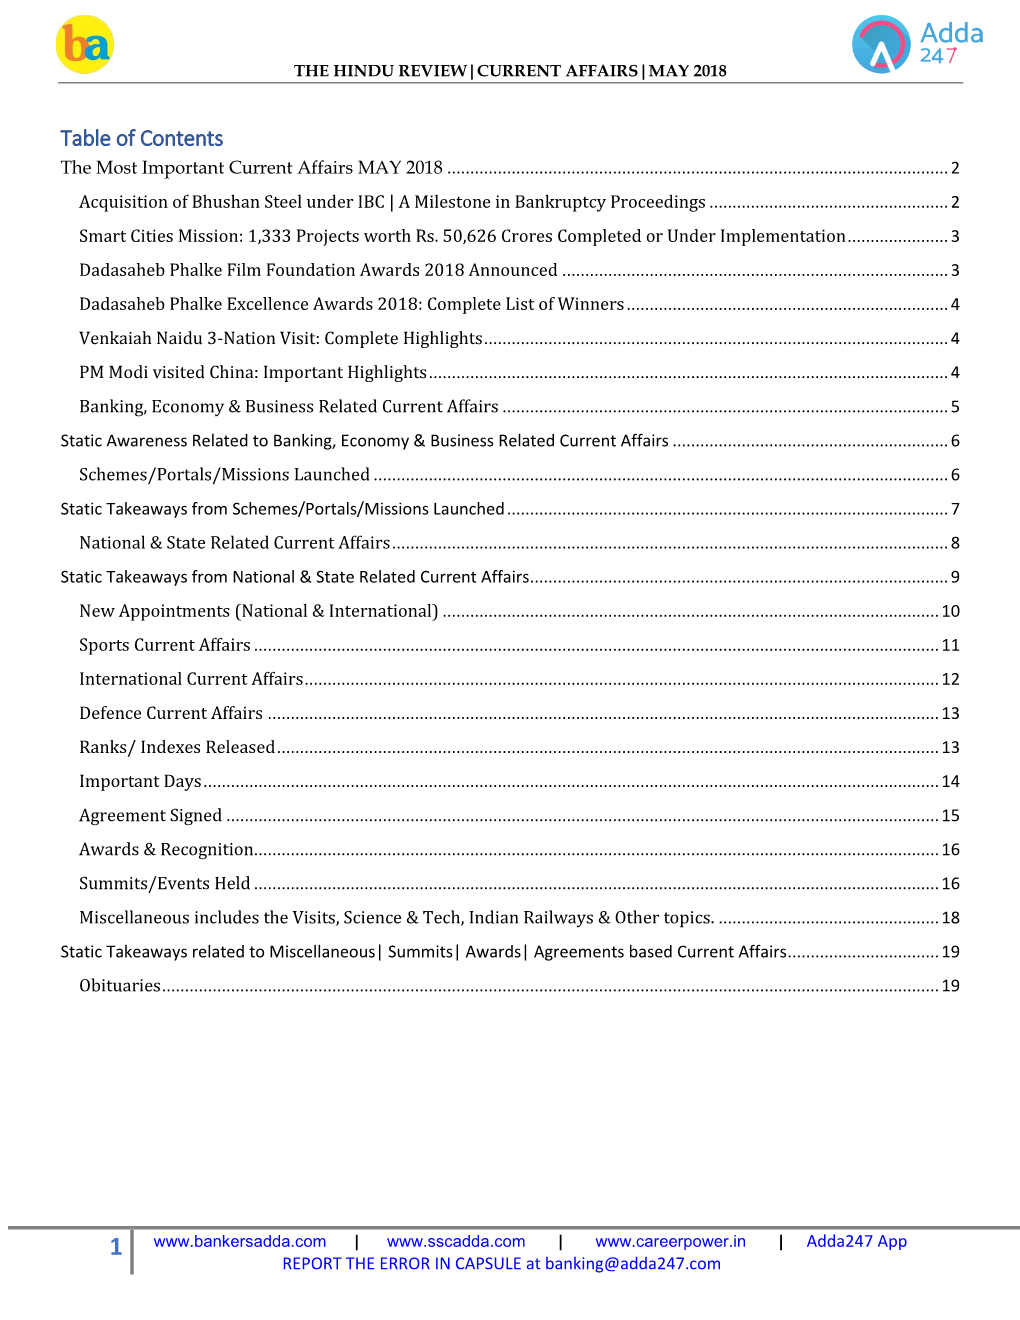 Table of Contents the Most Important Current Affairs MAY 2018